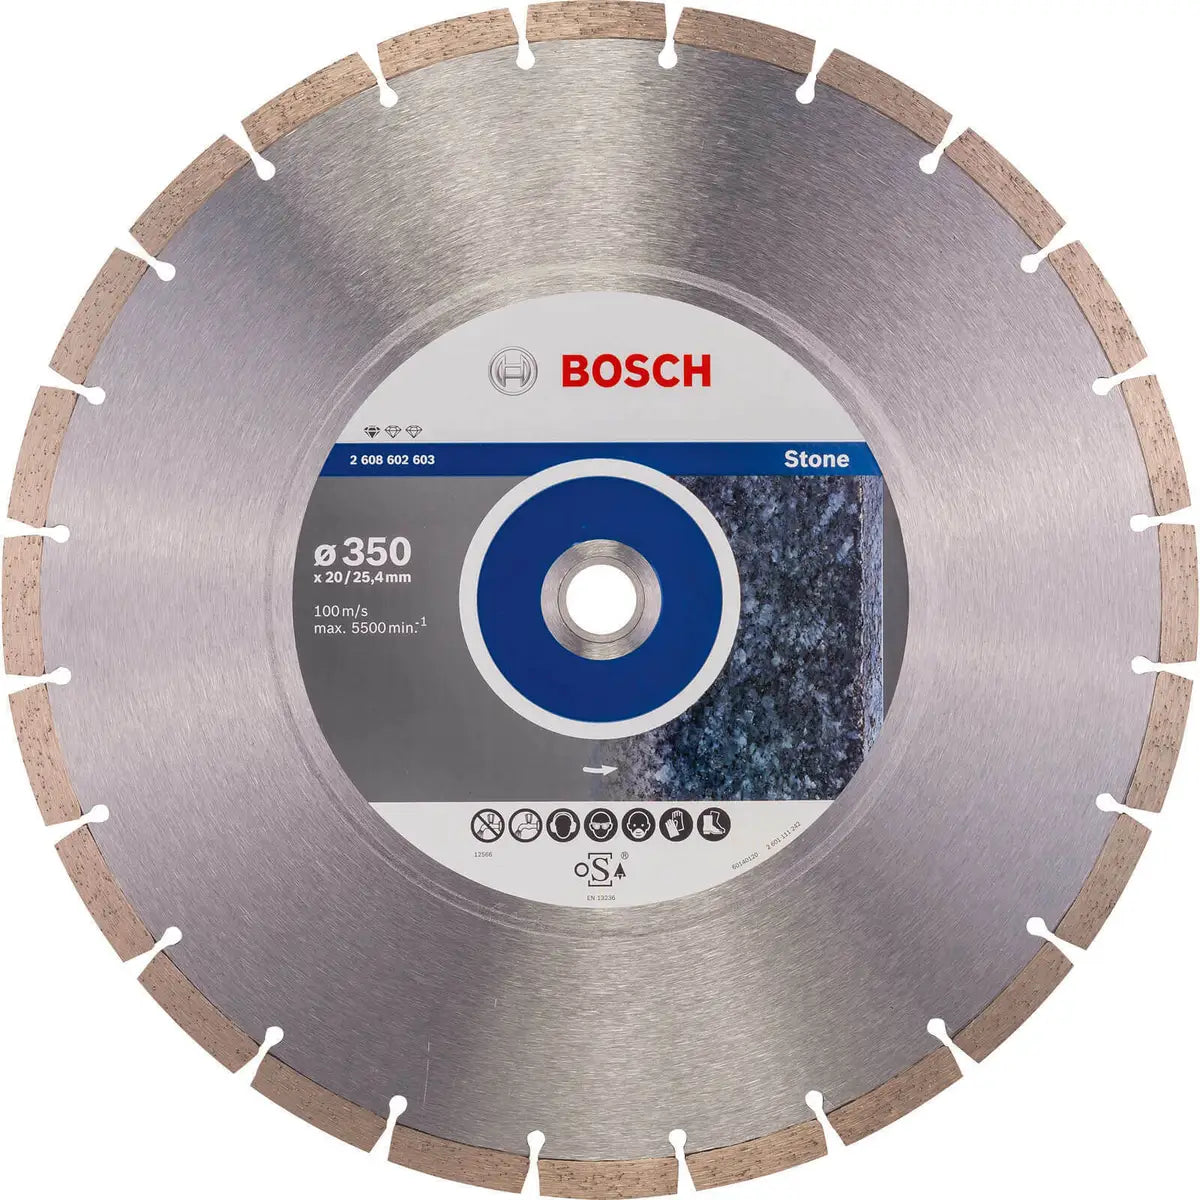 Bosch Standard for Stone 350 x 20,00+25,40 x 3,1 segmented 2608602603 Power Tool Services